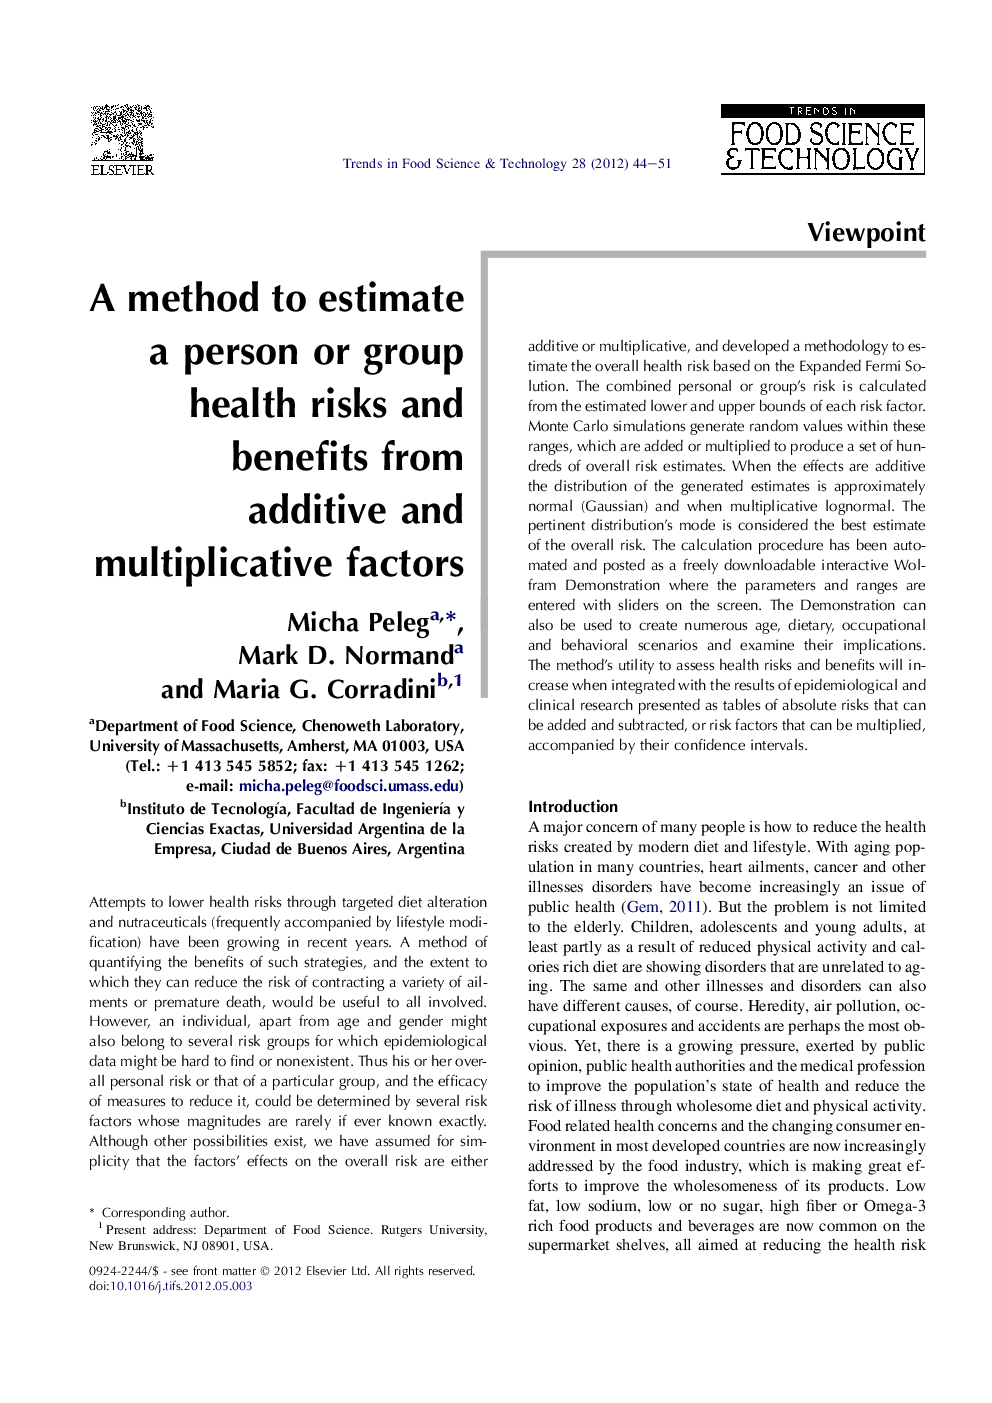 A method to estimate a person or group health risks and benefits from additive and multiplicative factors